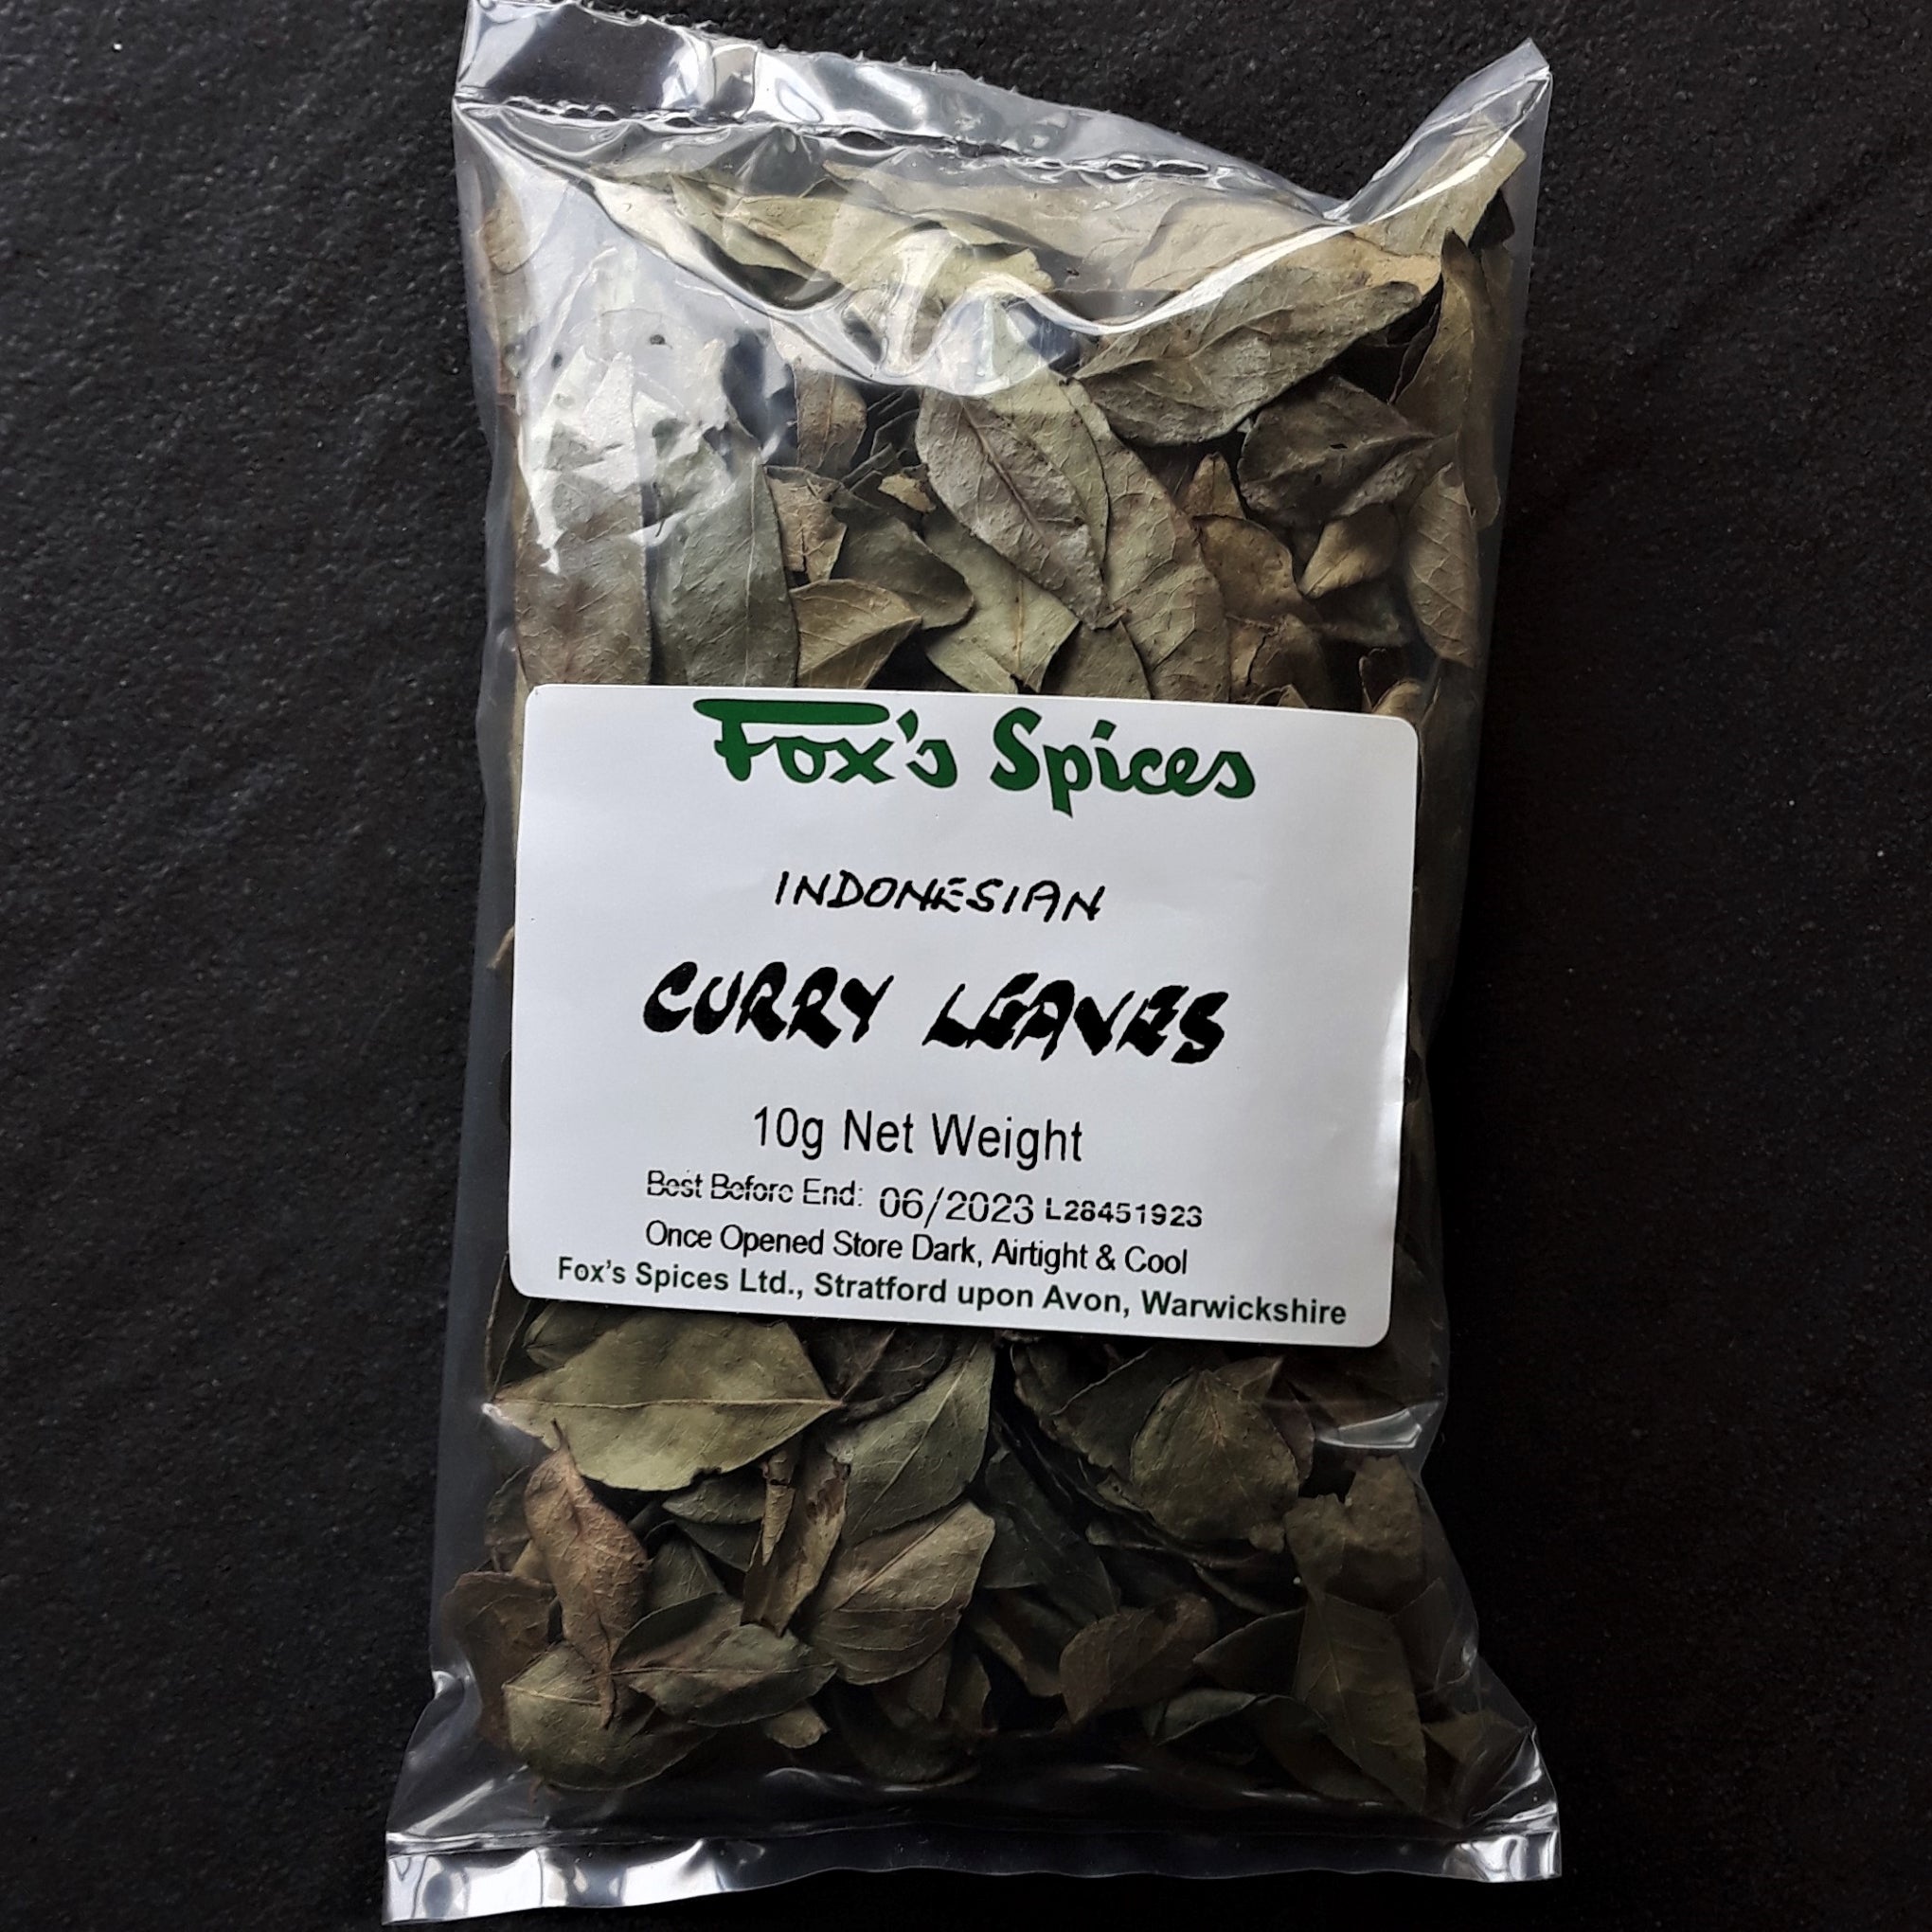 Fox's Spices curry leaves sold in 10g bags.